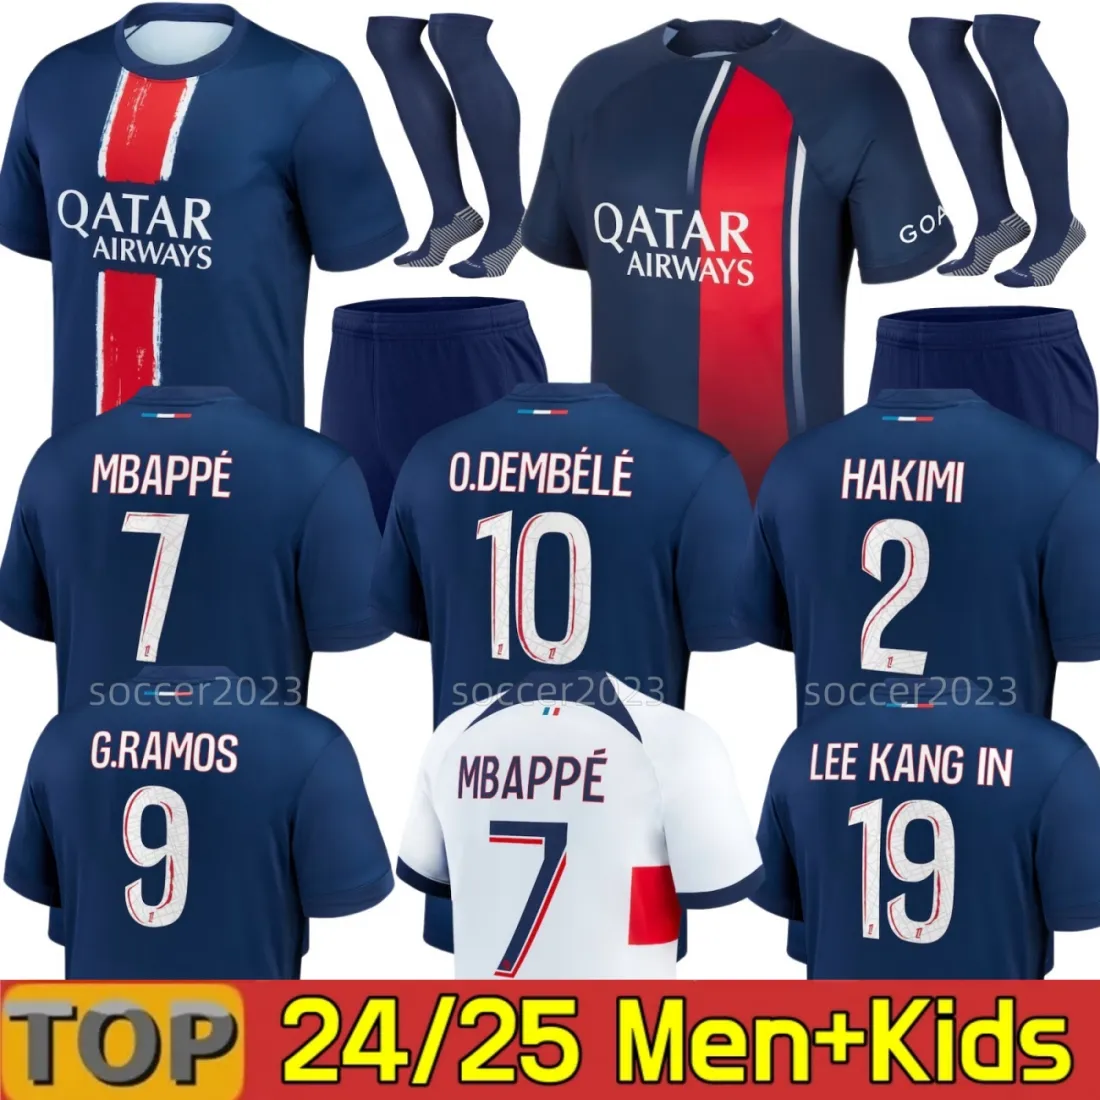 2024 2025 Mbappe Maillots O.Dembele Asension Soccer Jerseys R. Sanches Hakimi Enfants Maillot French Fourth Football Shirts Men Kits Kids Equipment Uniforms S M L XL